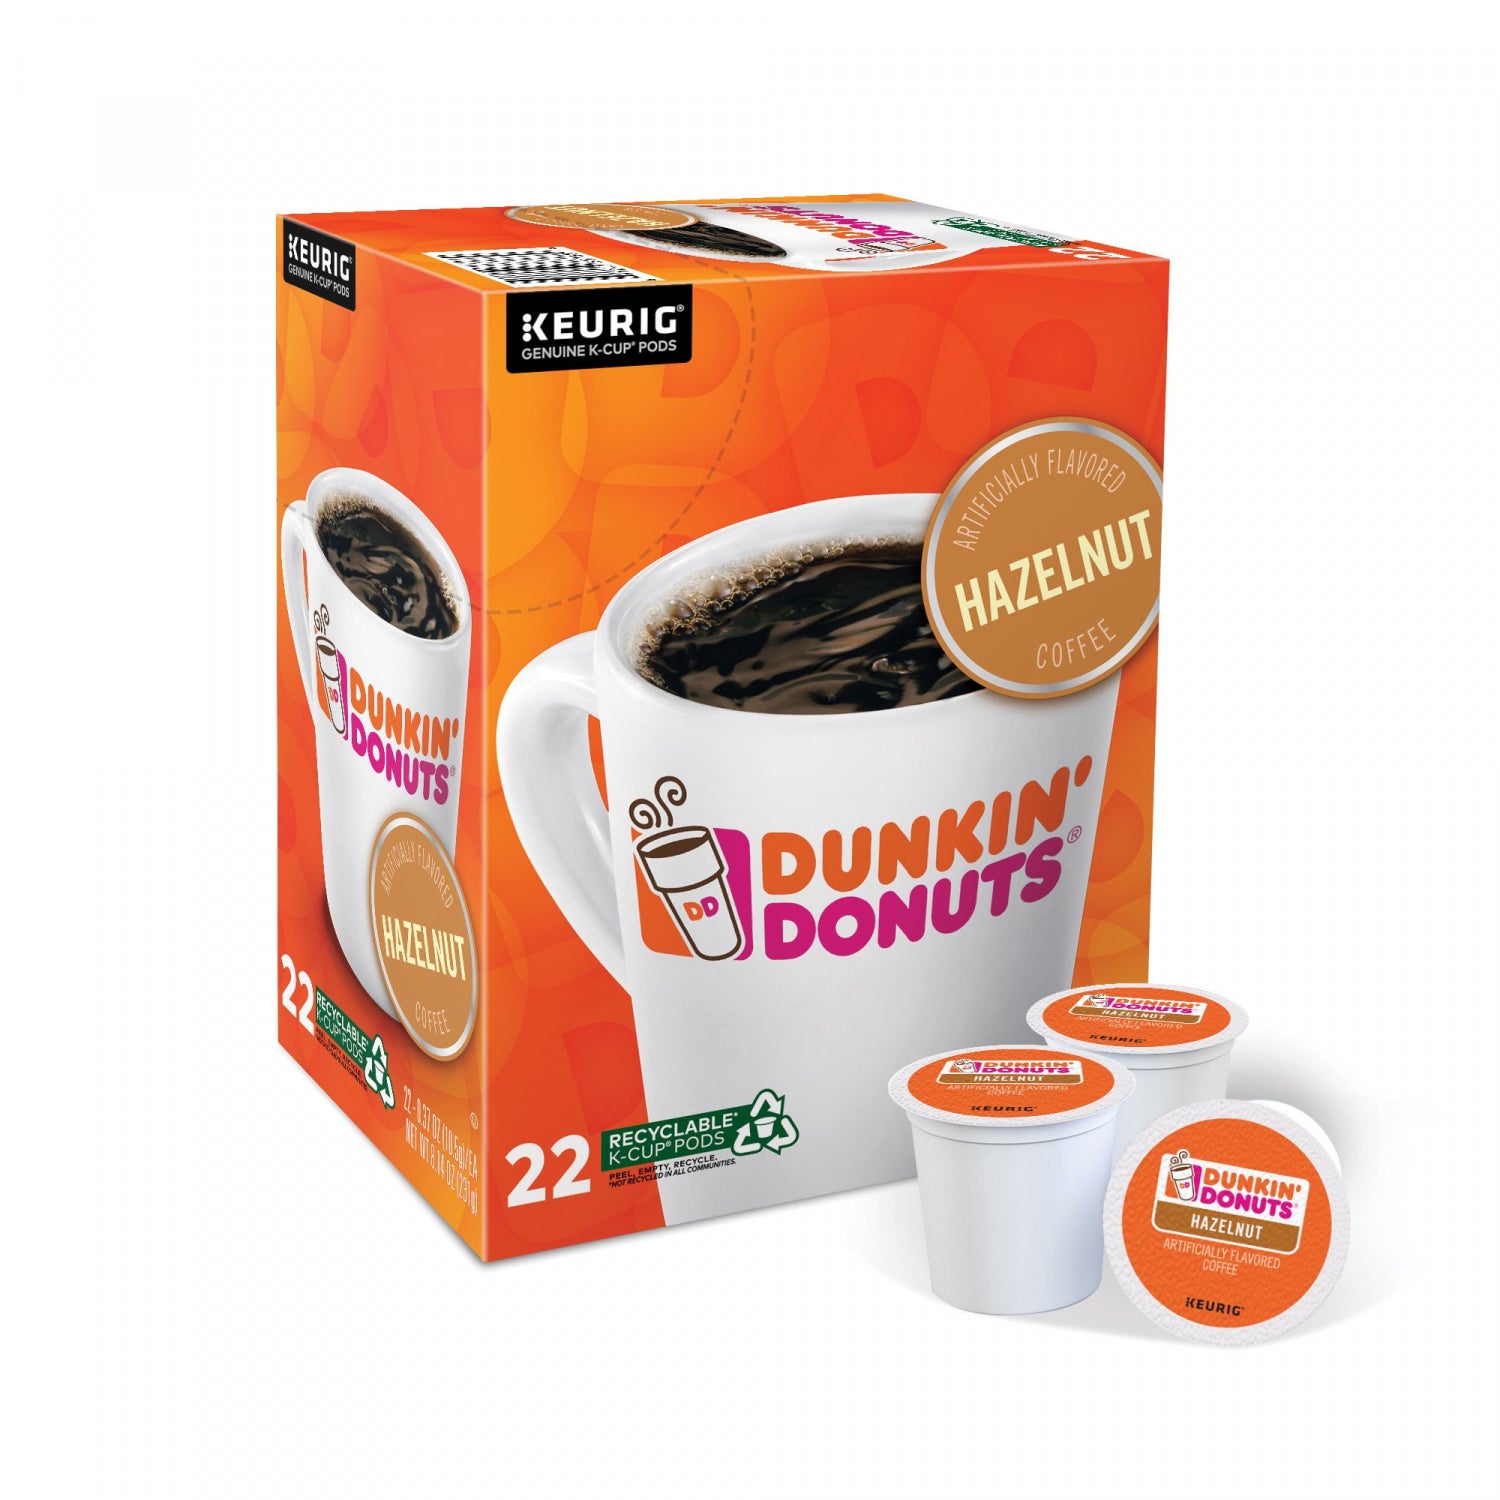 Dunkin' Donuts Hazelnut Coffee Keurig KCup Pods 22Count